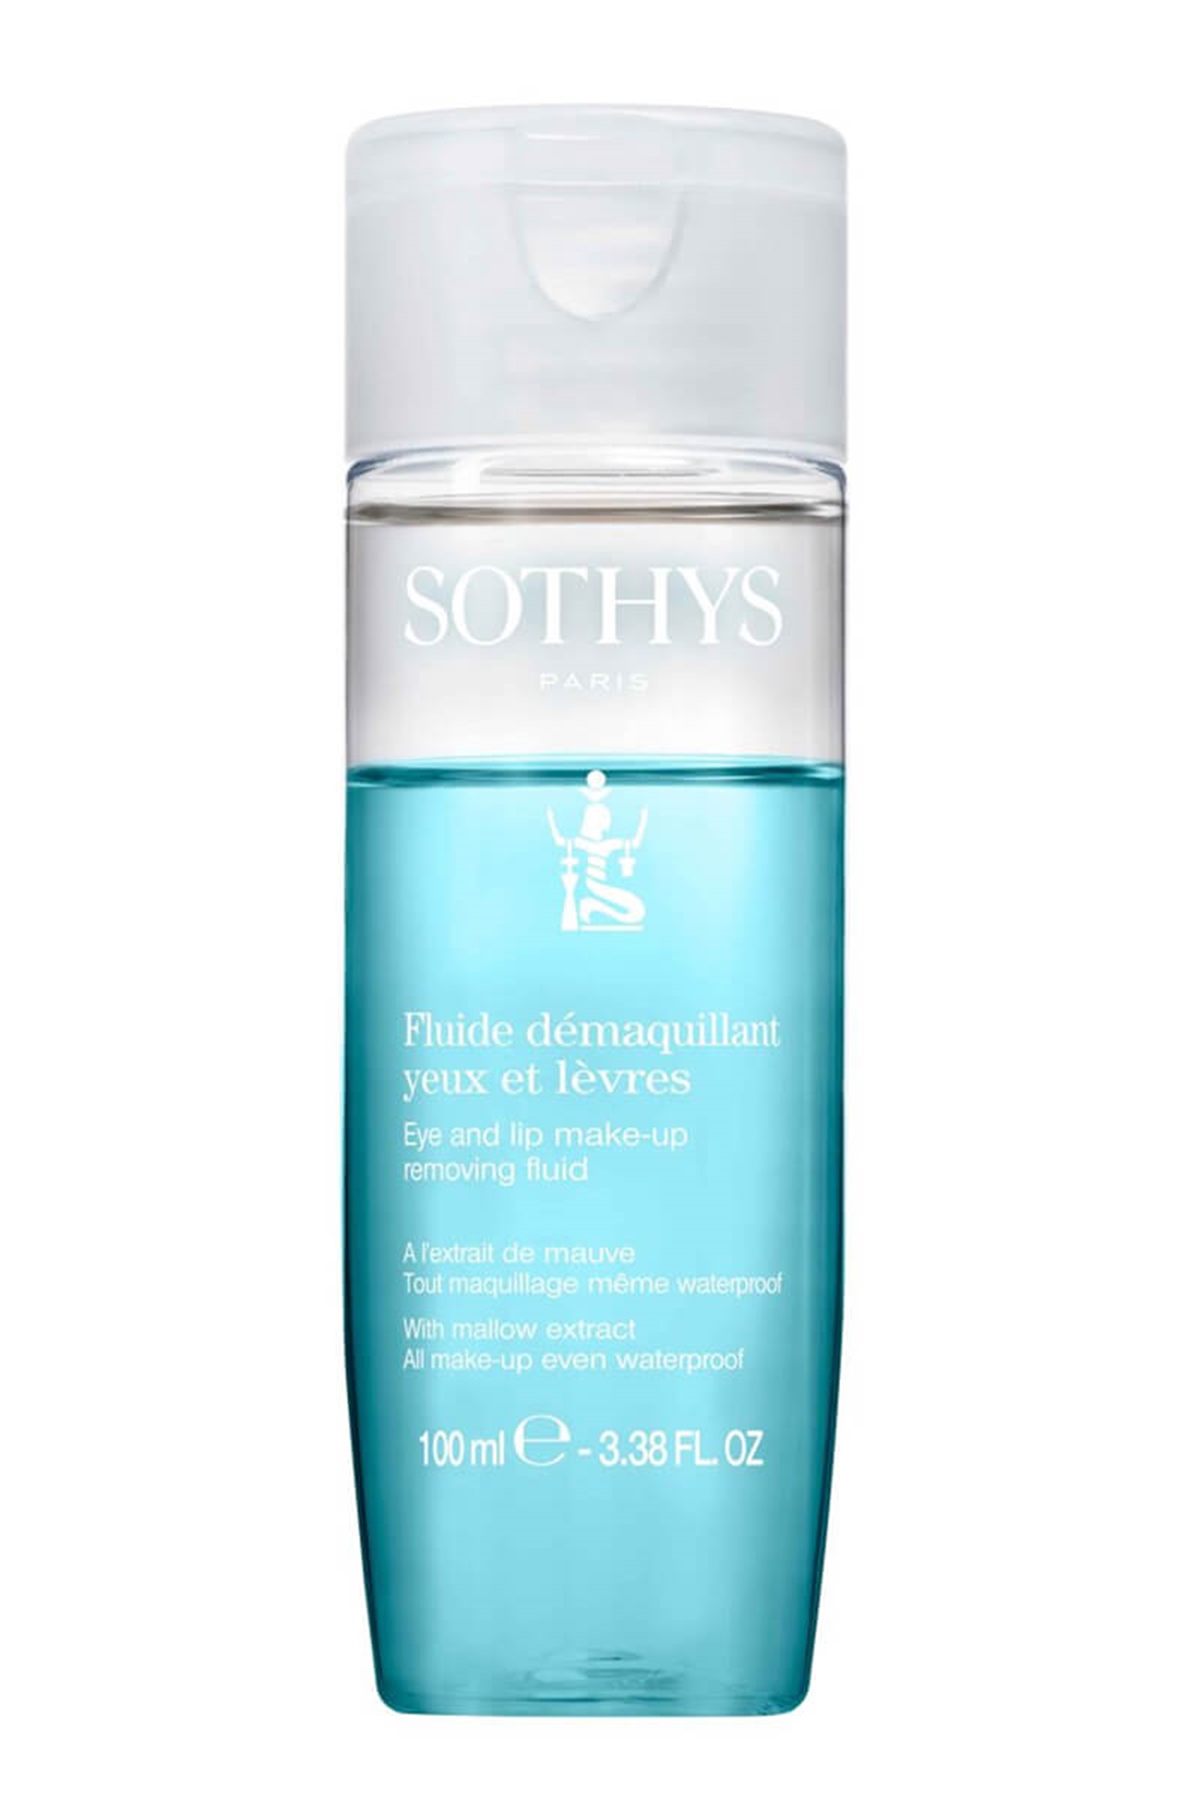 Sothys Bi-Phased Eye and Lip Makeup Remover | Nubia